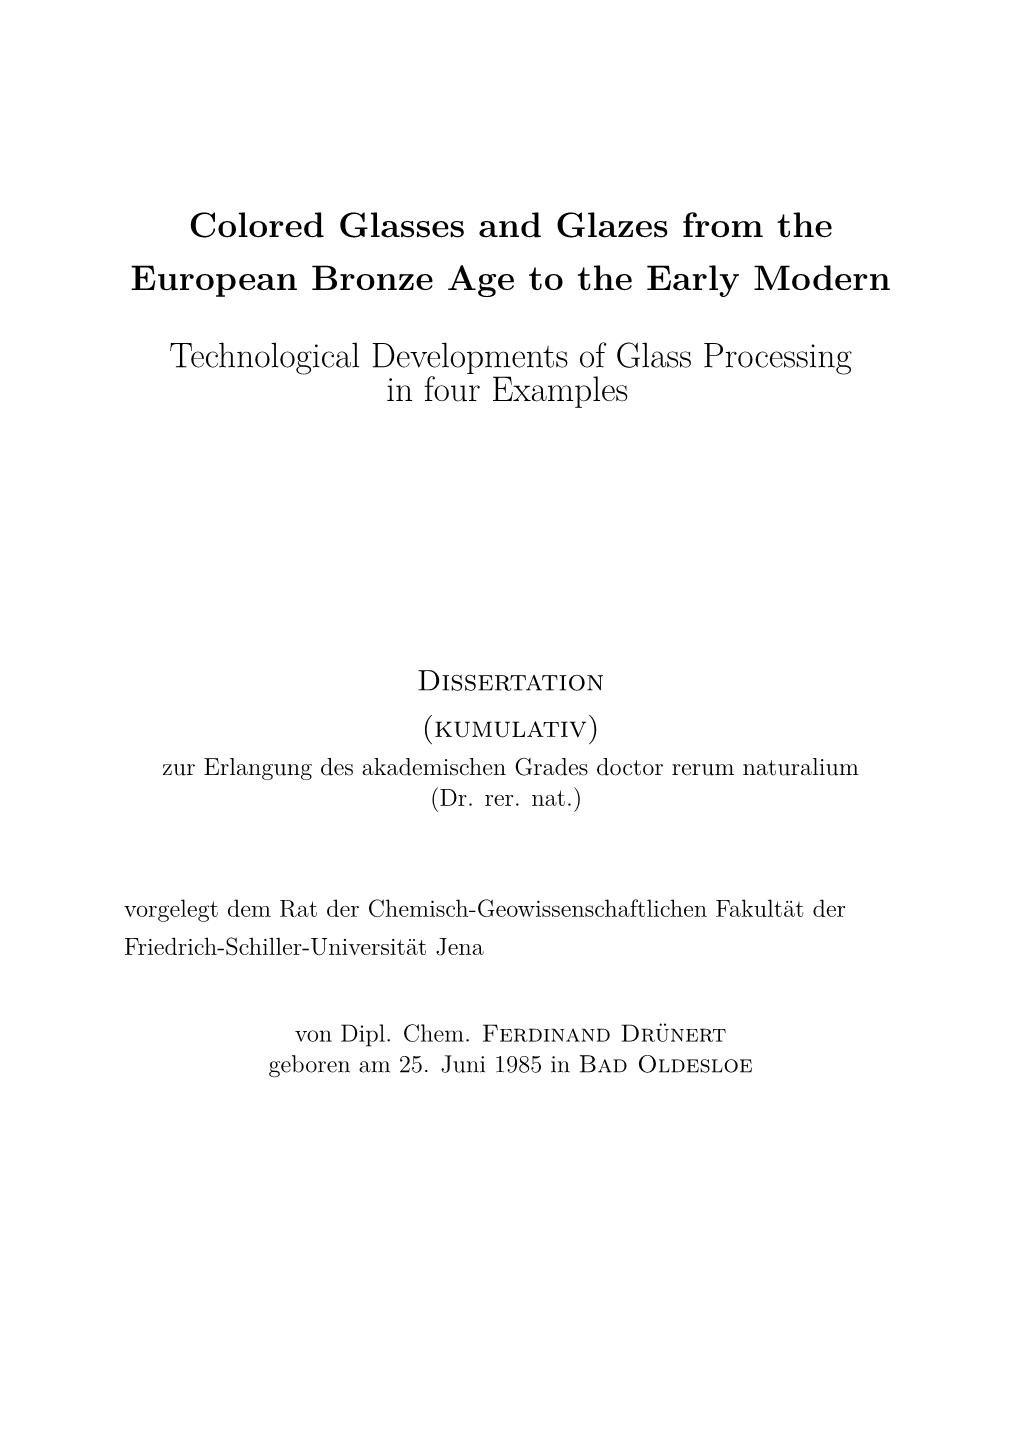 Colored Glasses and Glazes from the European Bronze Age to the Early Modern